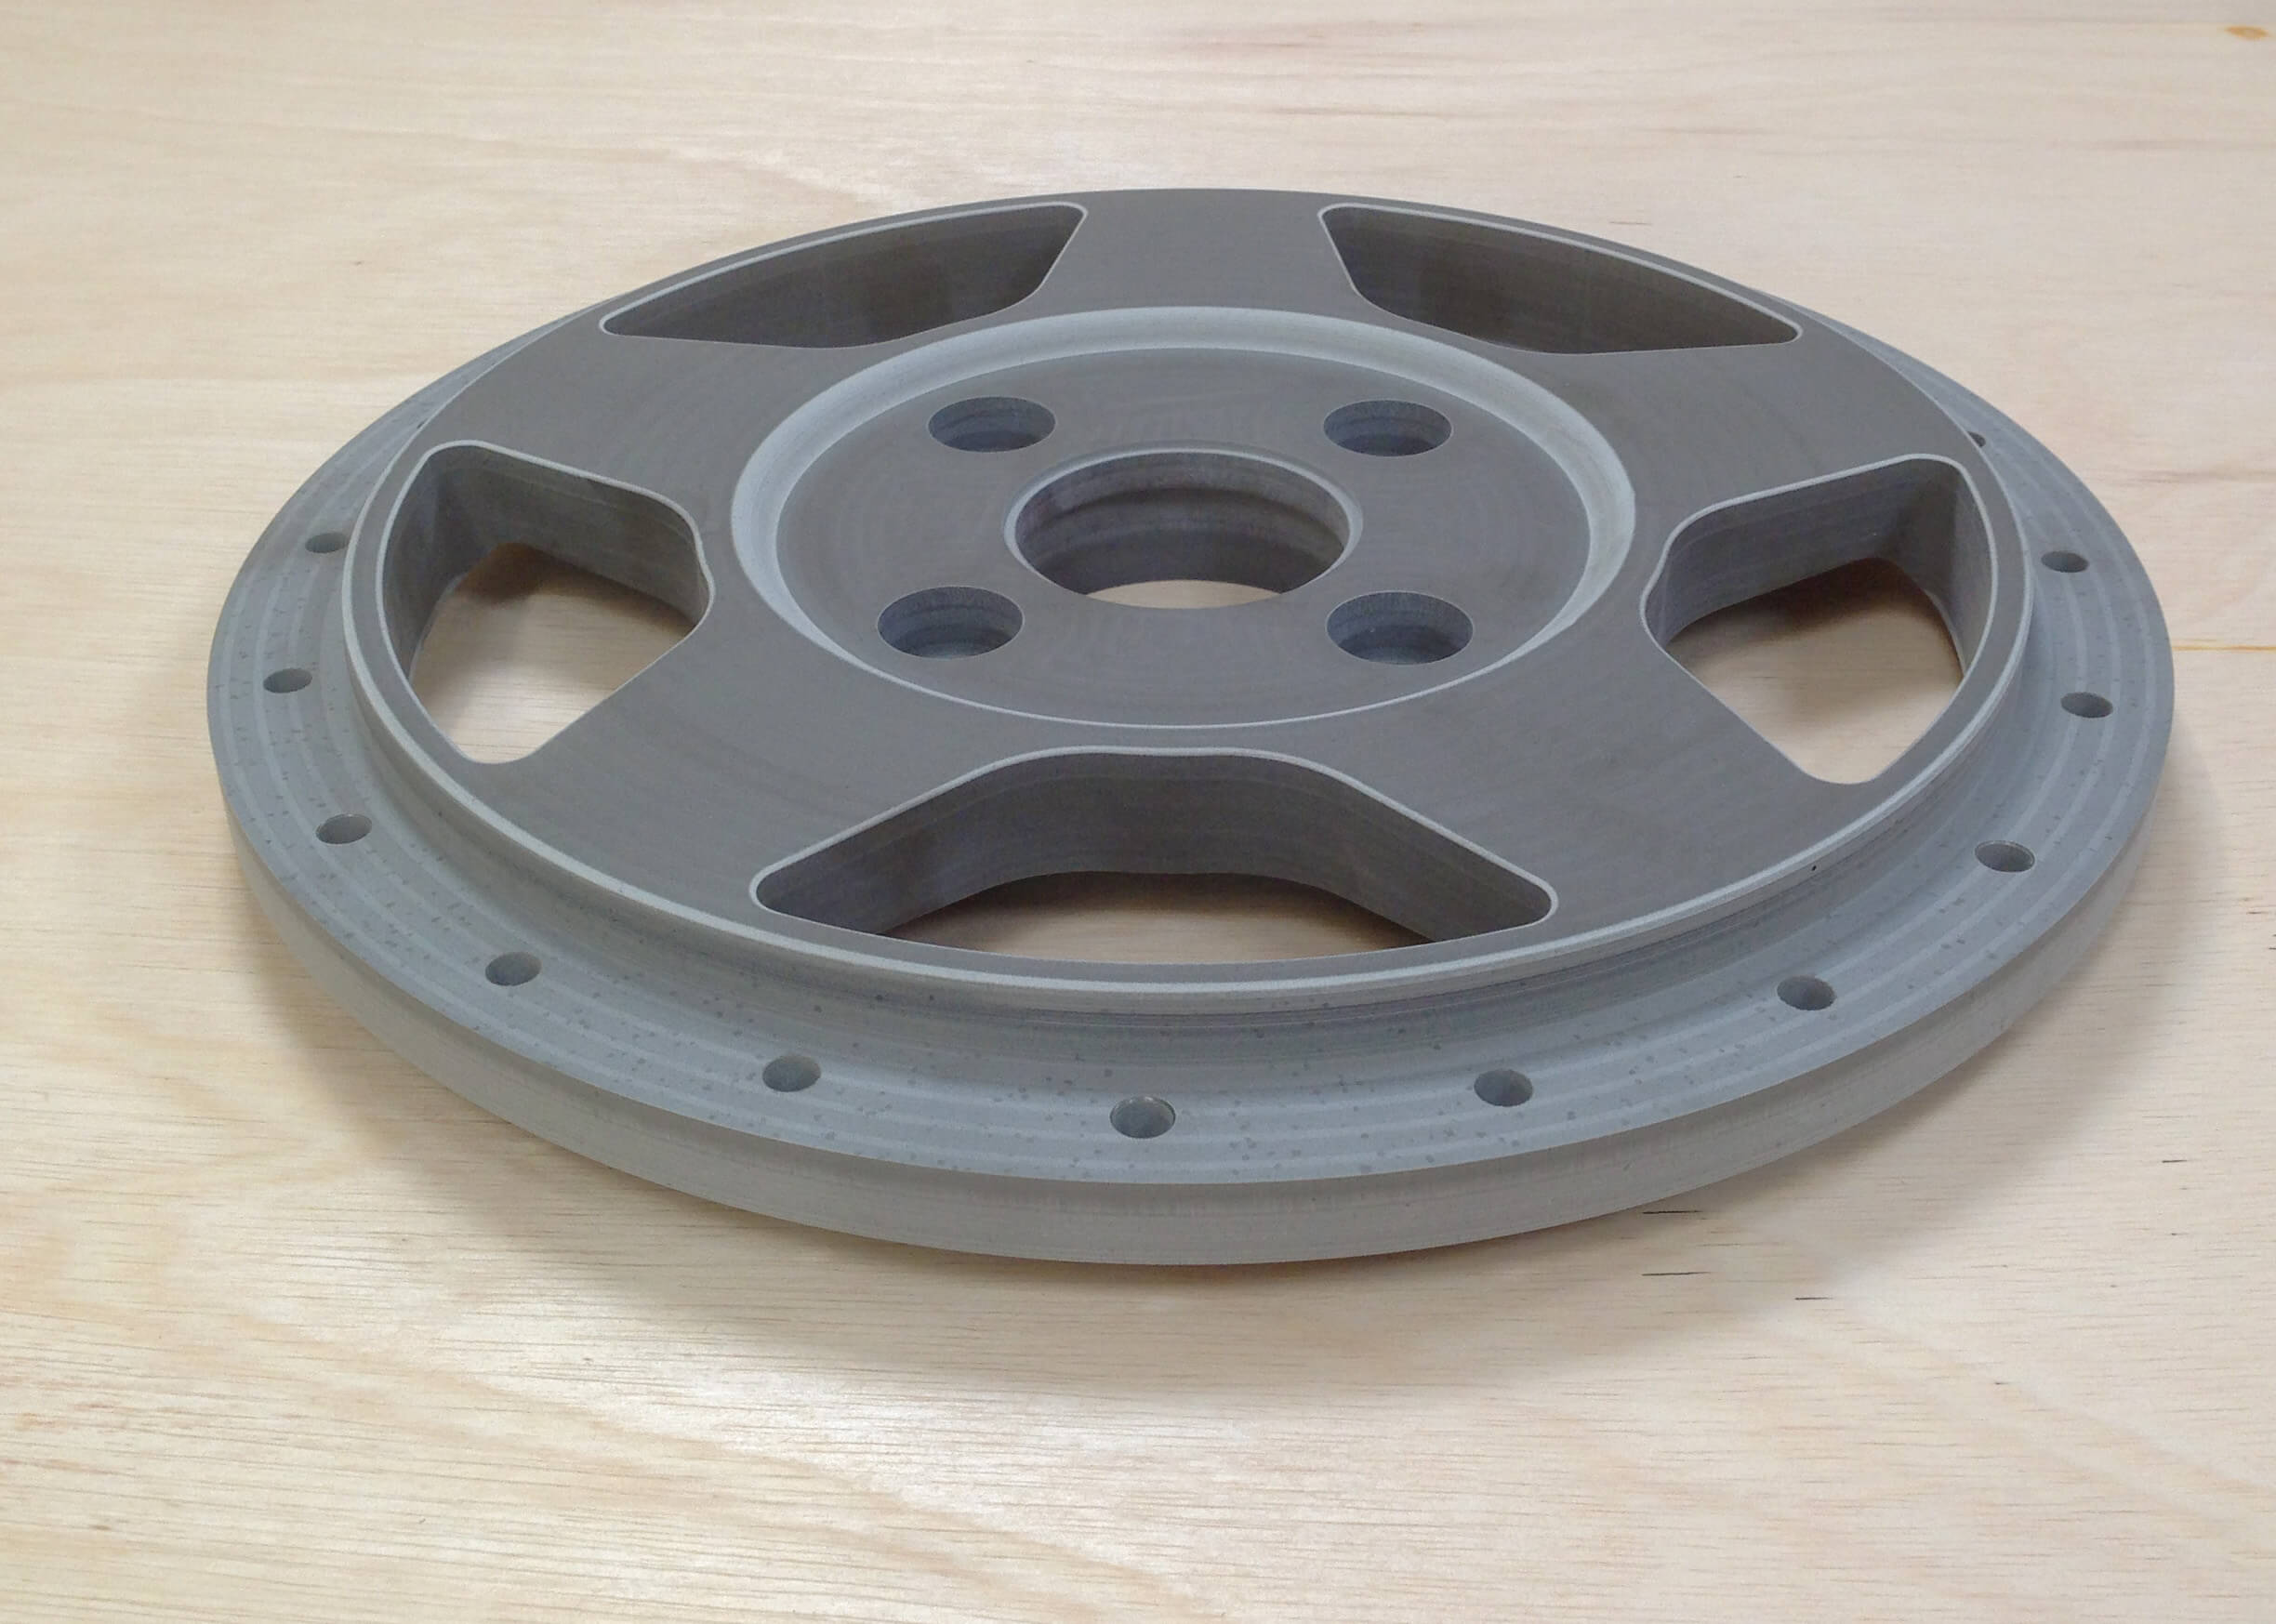 An example of our product prototyping service. A custom Designed 3-Piece Wheel Face